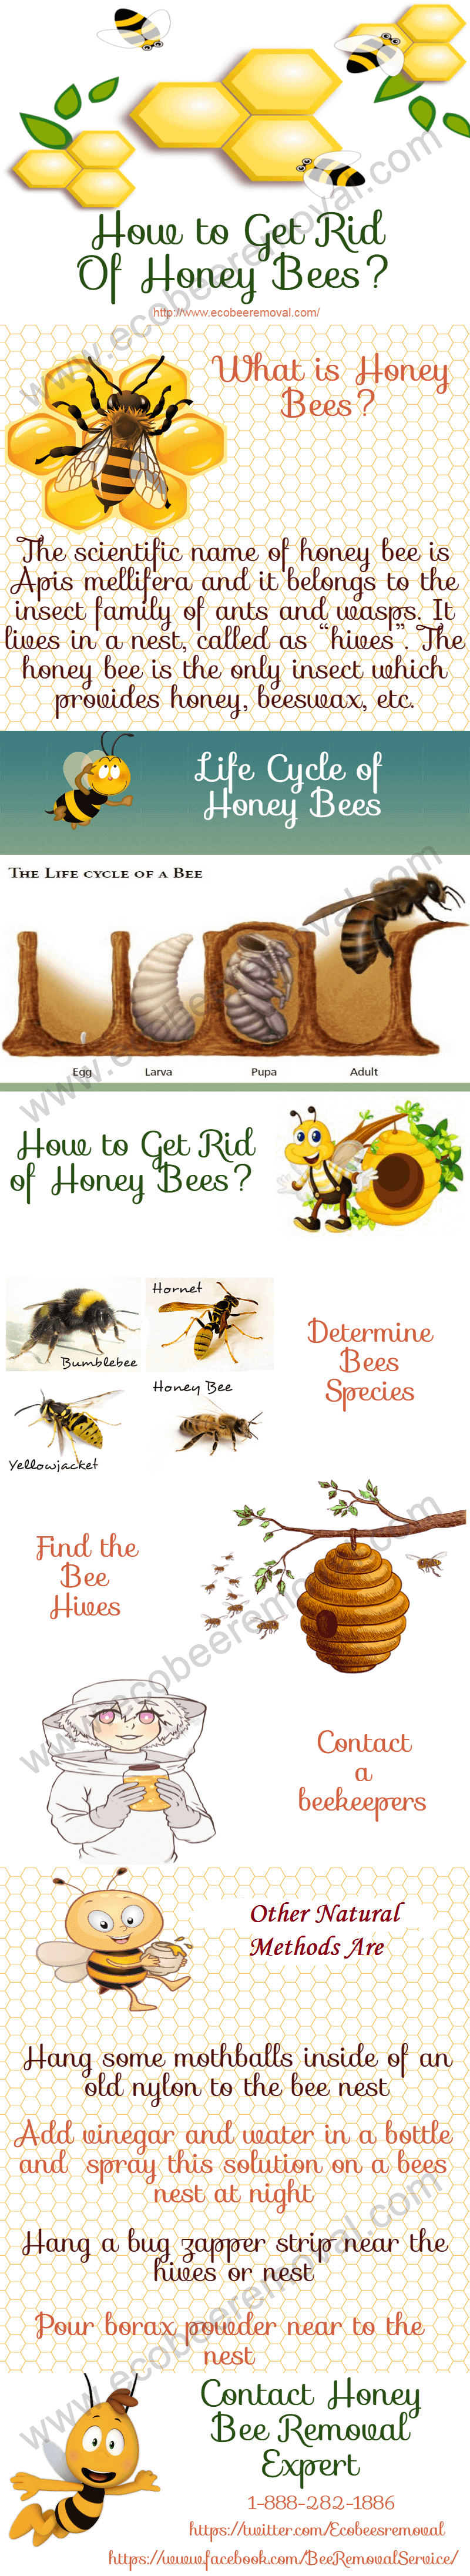 how to get rid of honey bees